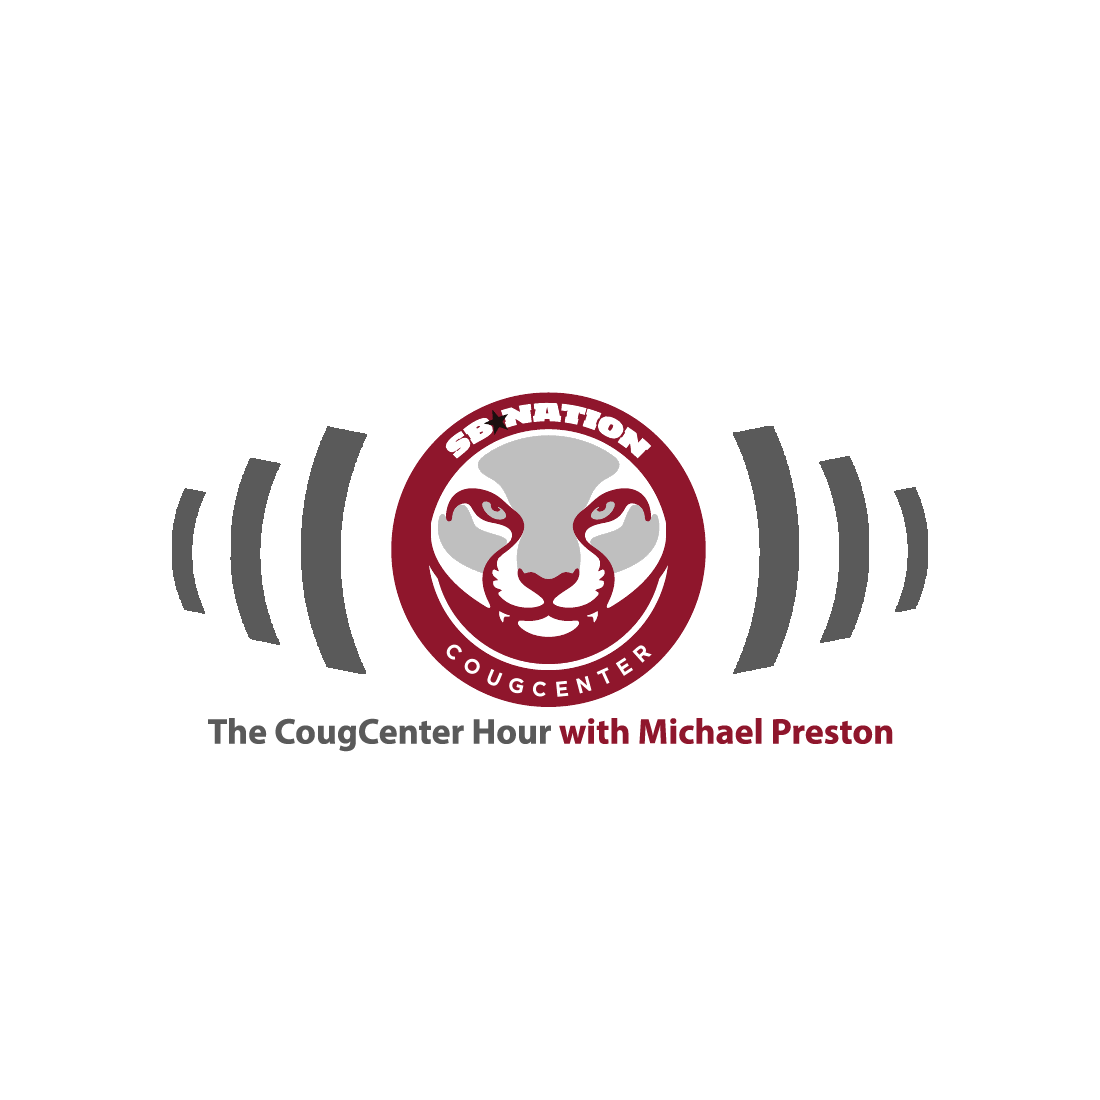 The CougCenter Hour